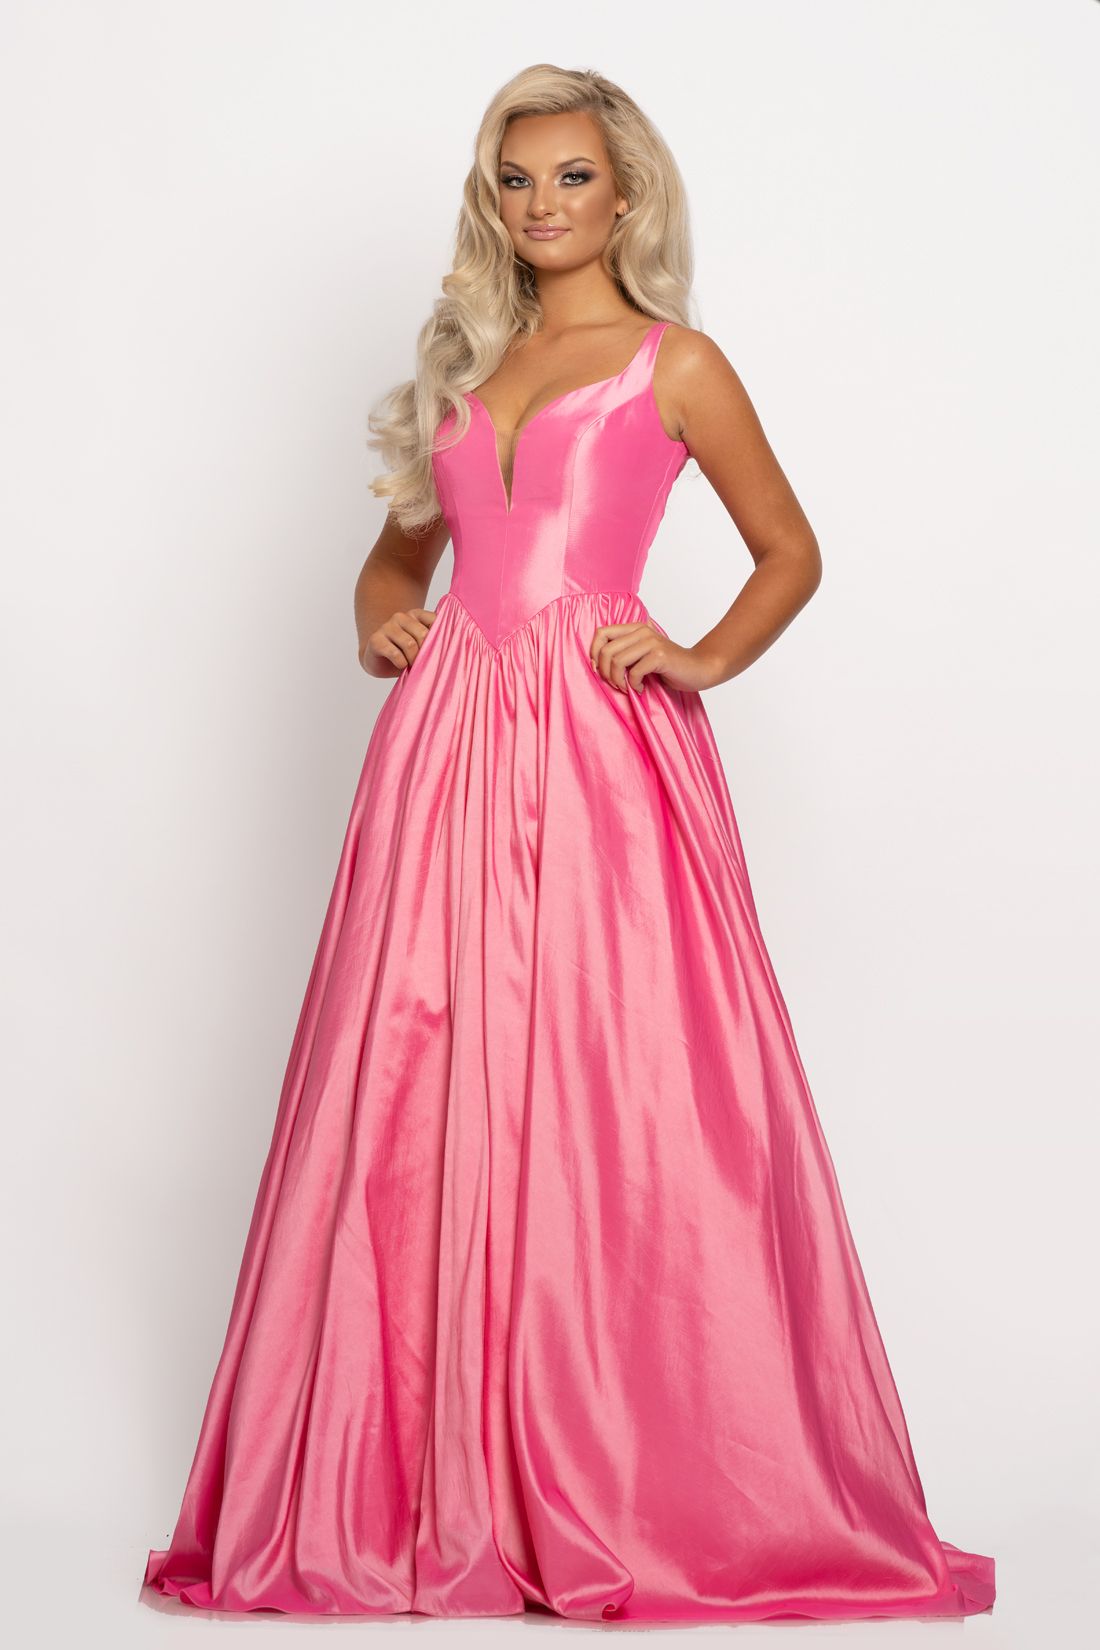 Johnathan Kayne 2225 Major Cinderella Vibes in this shimmery taffeta long A line prom dress.  This pageant gown features a plunging sweetheart neckline with mesh panel and v back.   Colors:  Bubblegum, Mandarin  Sizes  00, 0, 2, 4, 6, 8, 10, 12, 14, 16